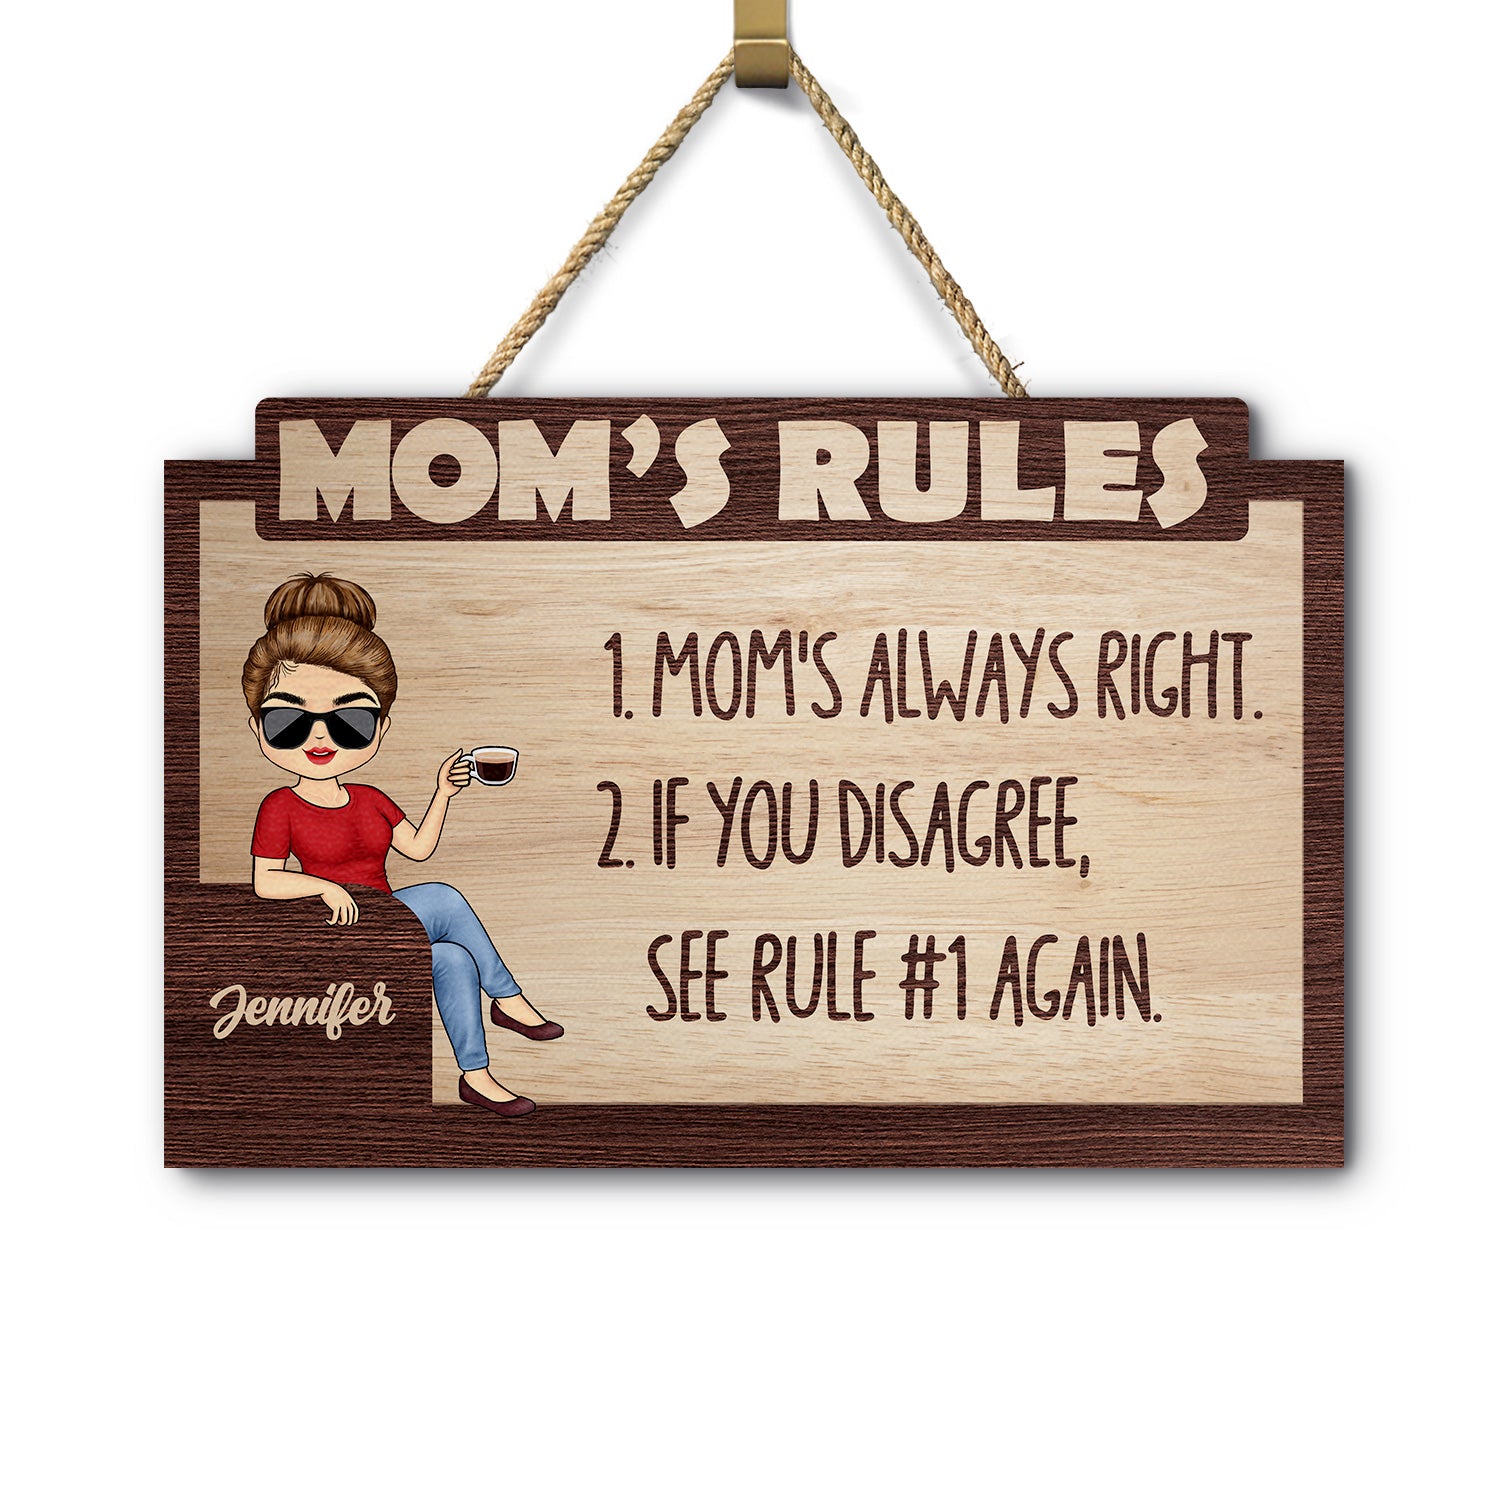 Mom's Rules - Gift For Mom - Personalized Custom Shaped Wood Sign